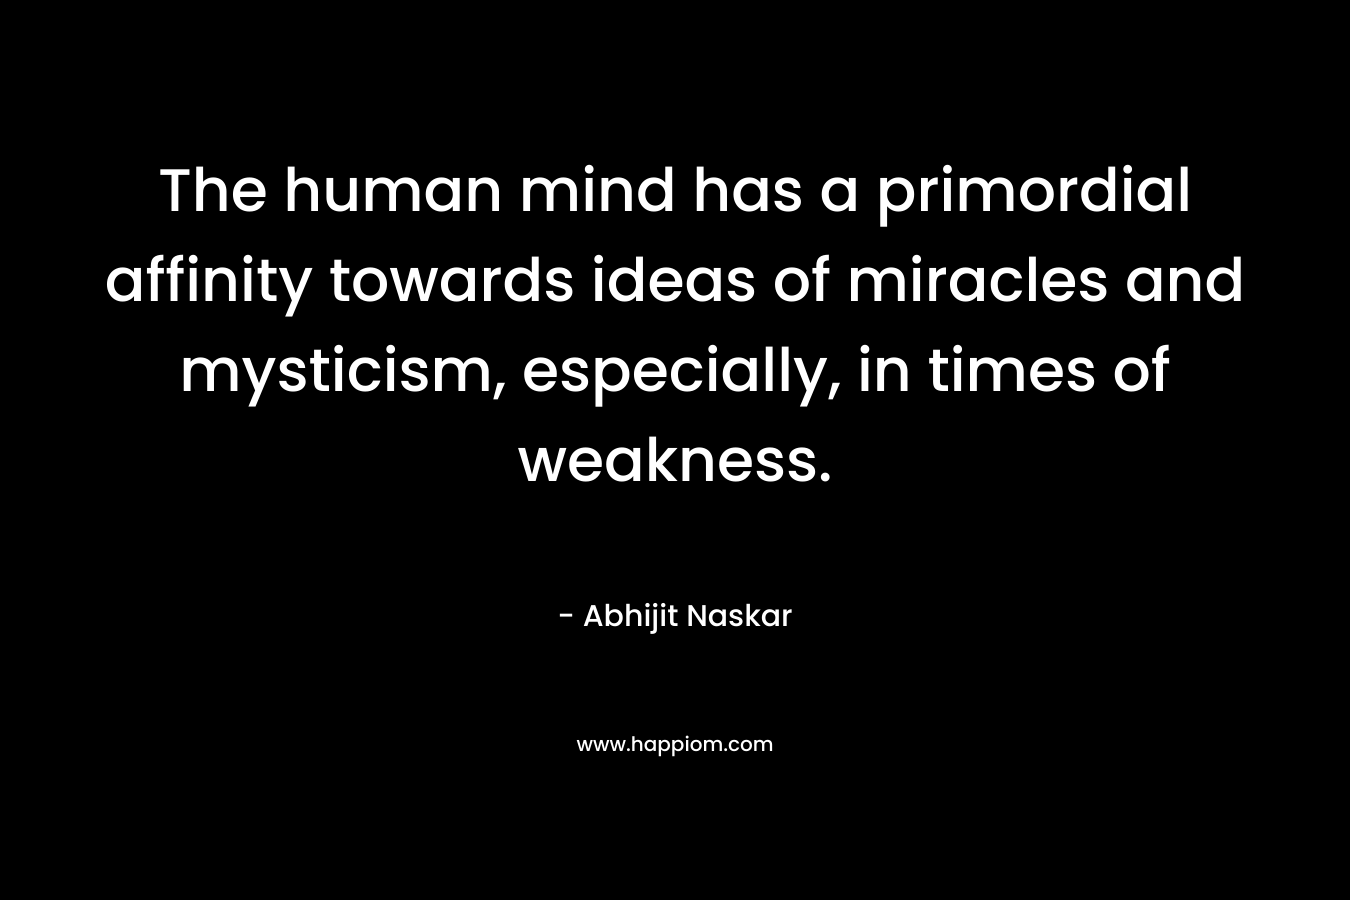 The human mind has a primordial affinity towards ideas of miracles and mysticism, especially, in times of weakness. – Abhijit Naskar